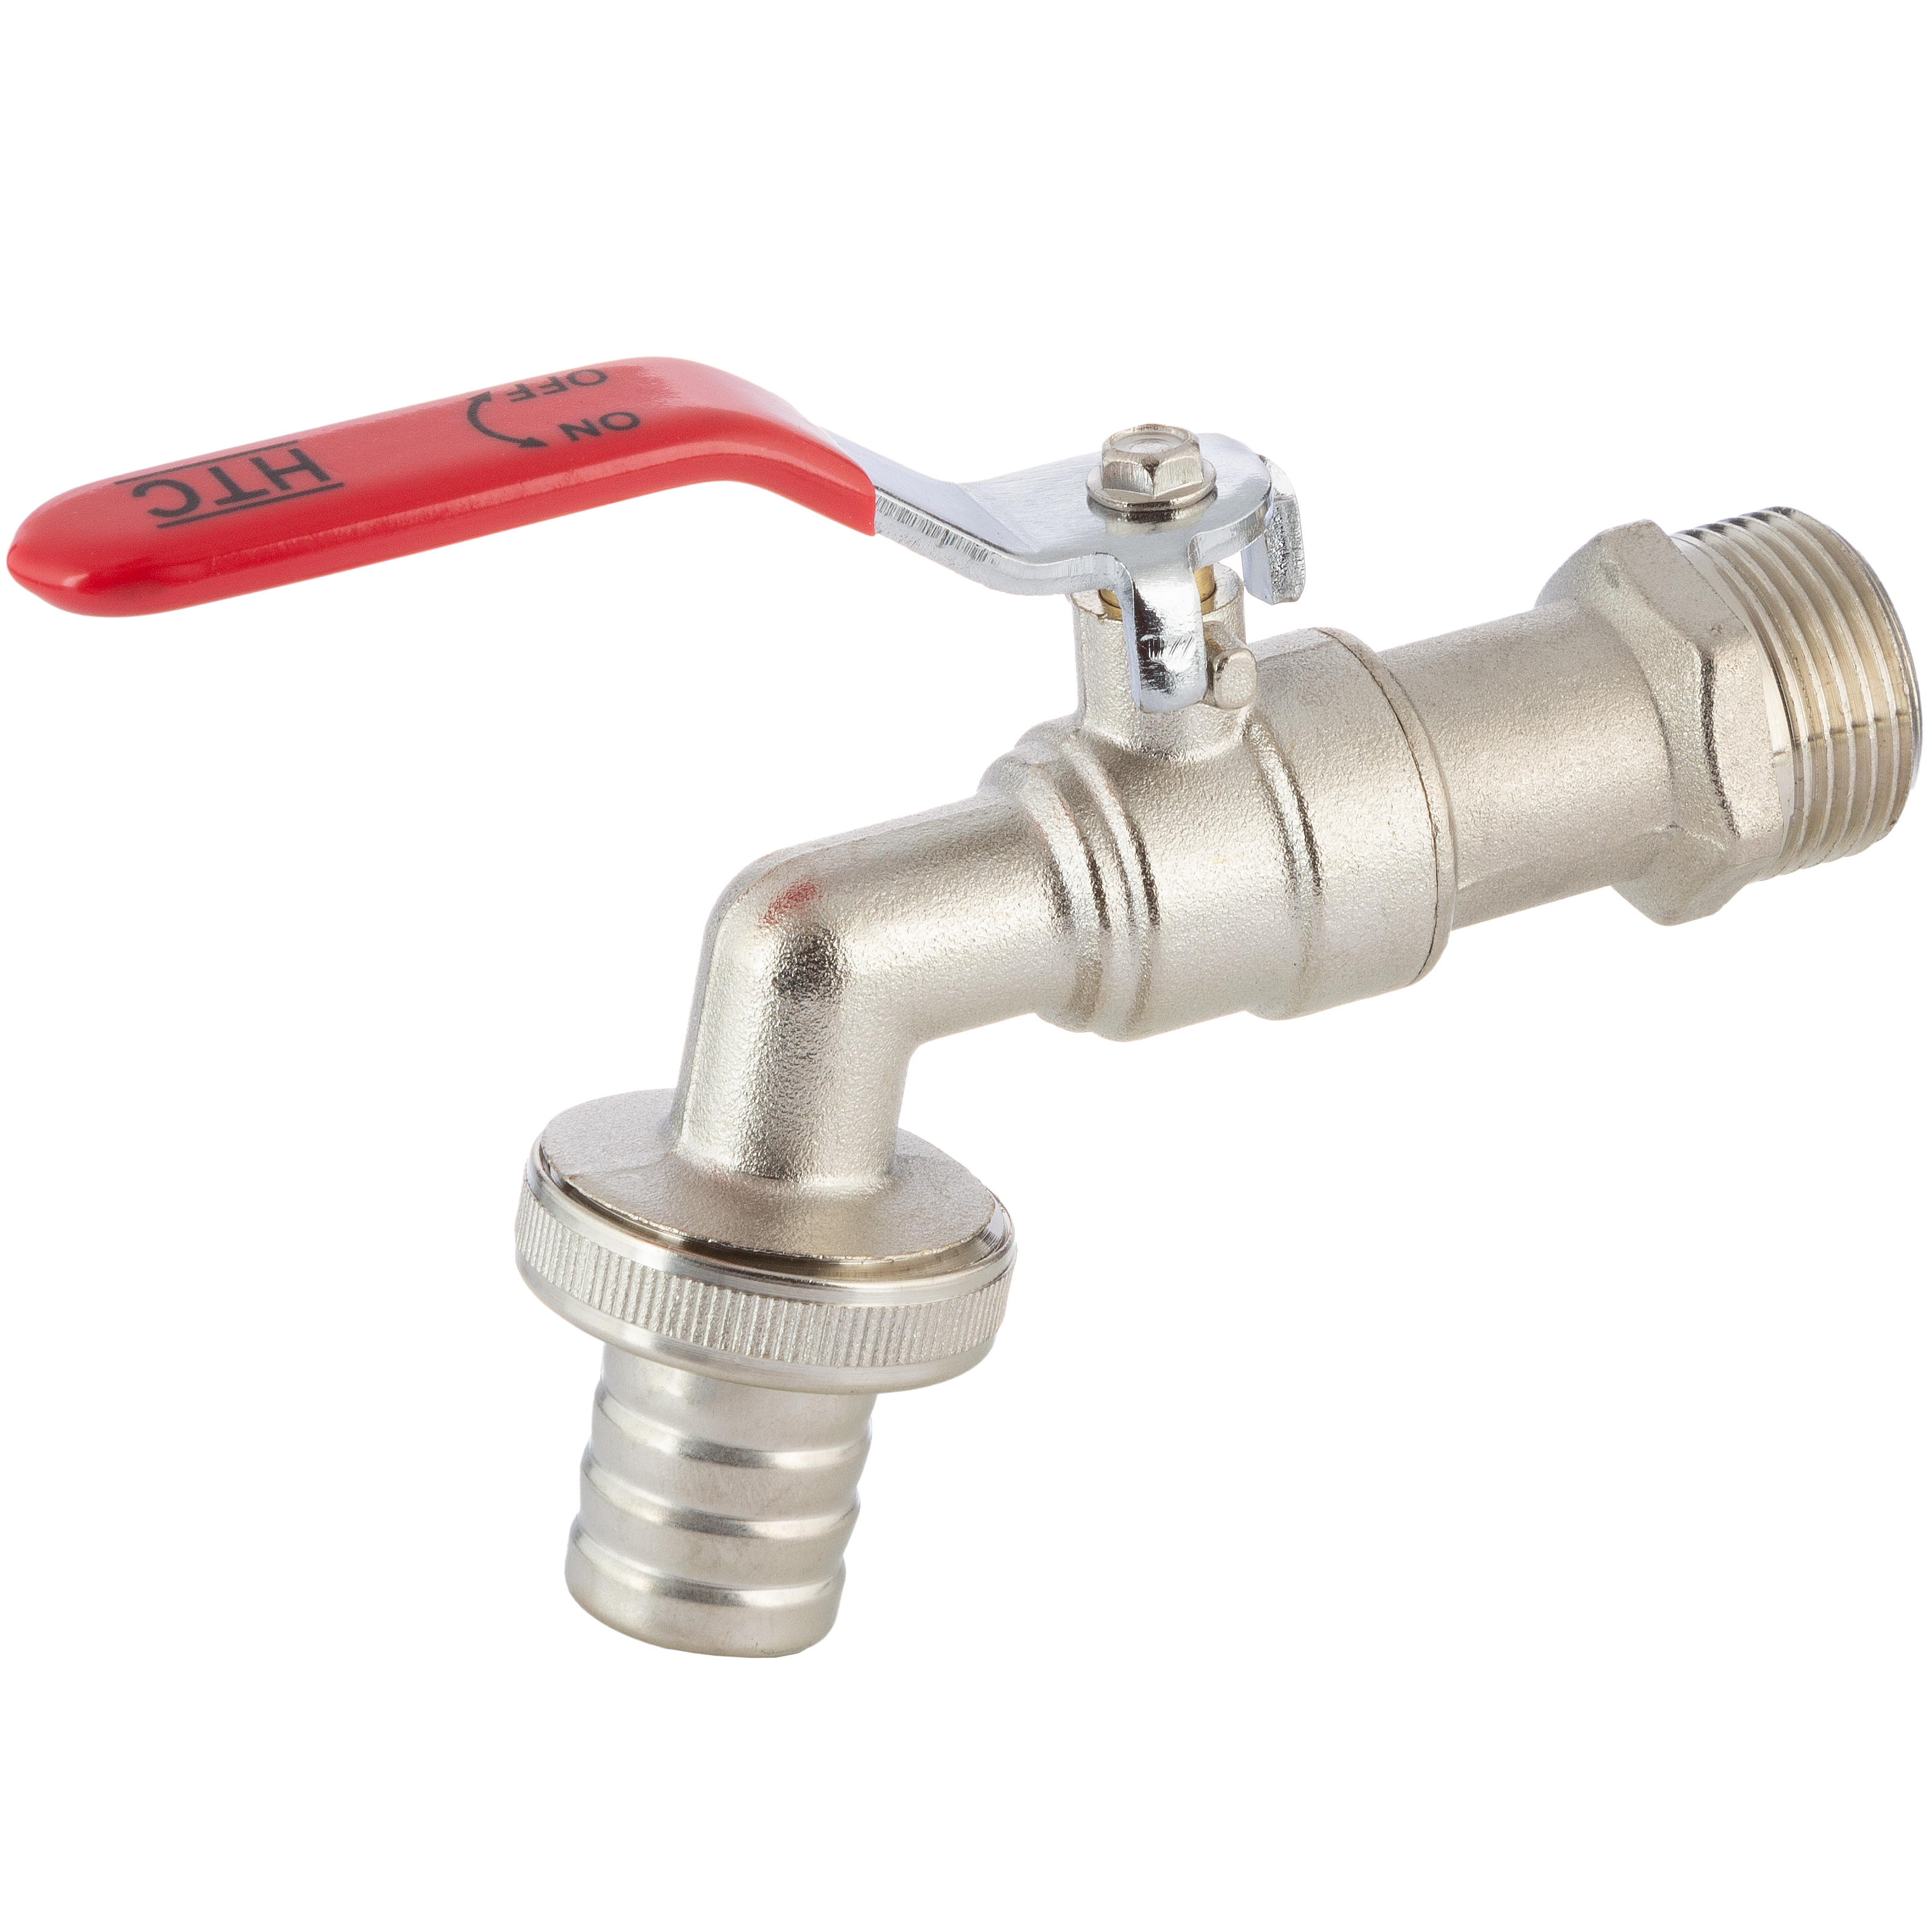 Brass spigot with hose tail and steel handle